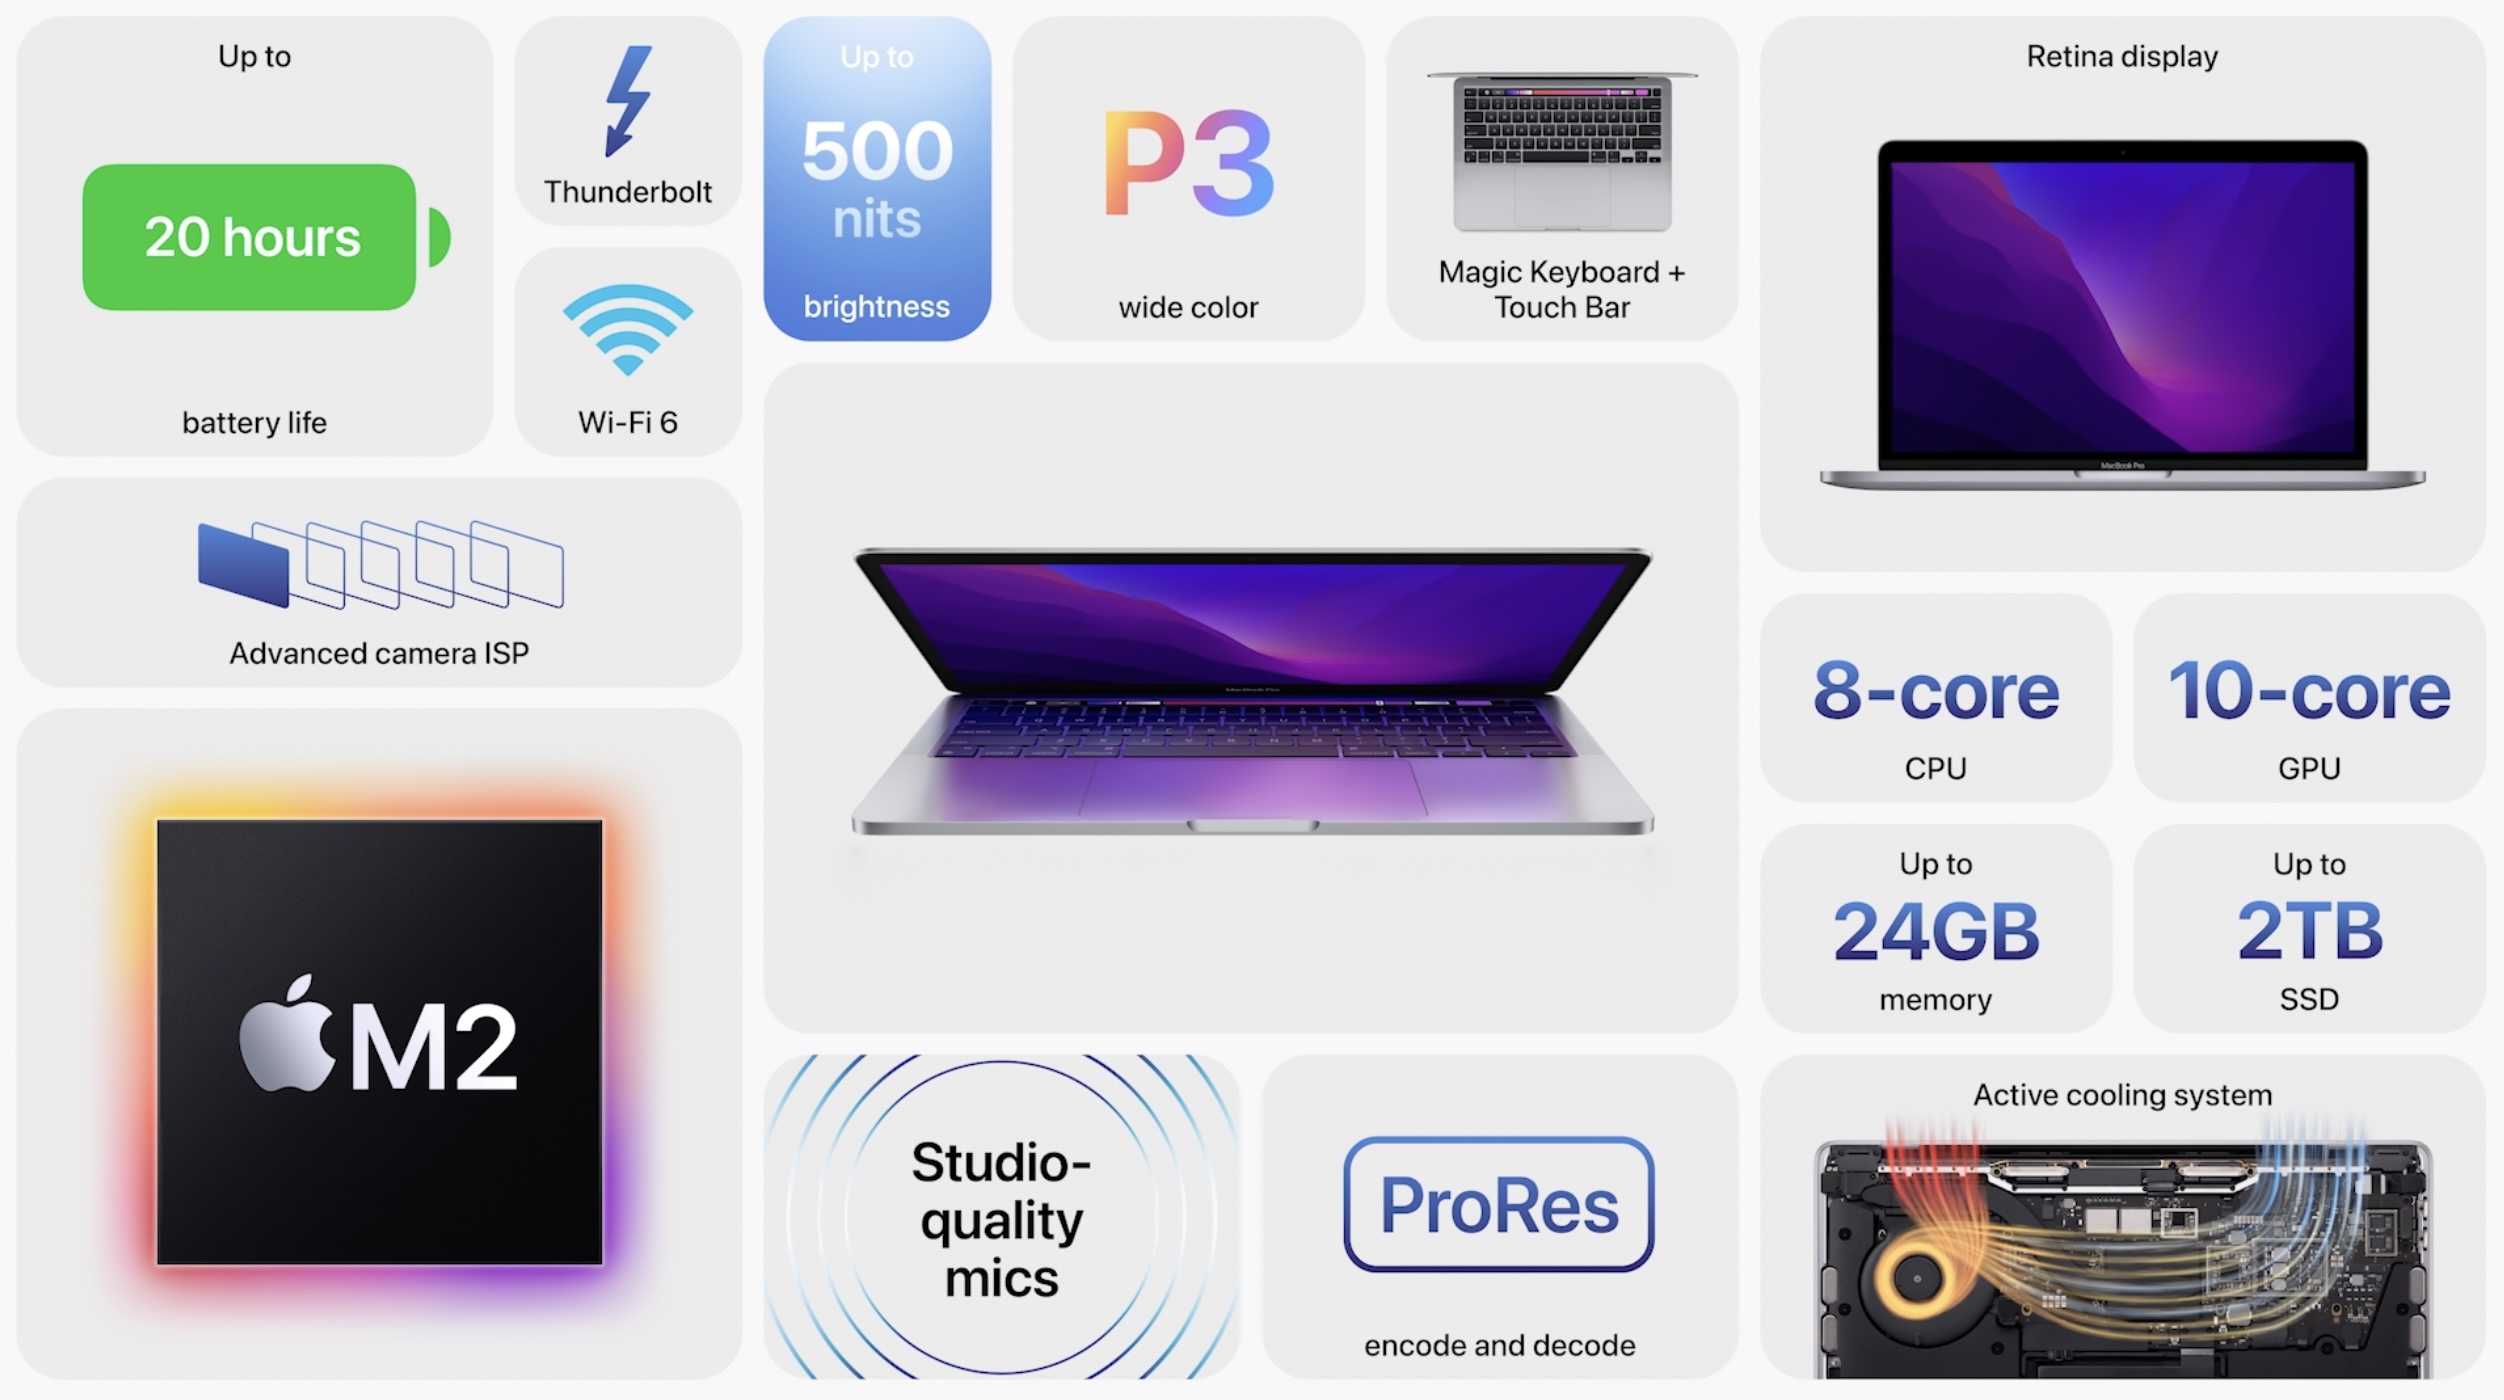 Entry-level MacBook Pro announced with M2 chip, Touch Bar 